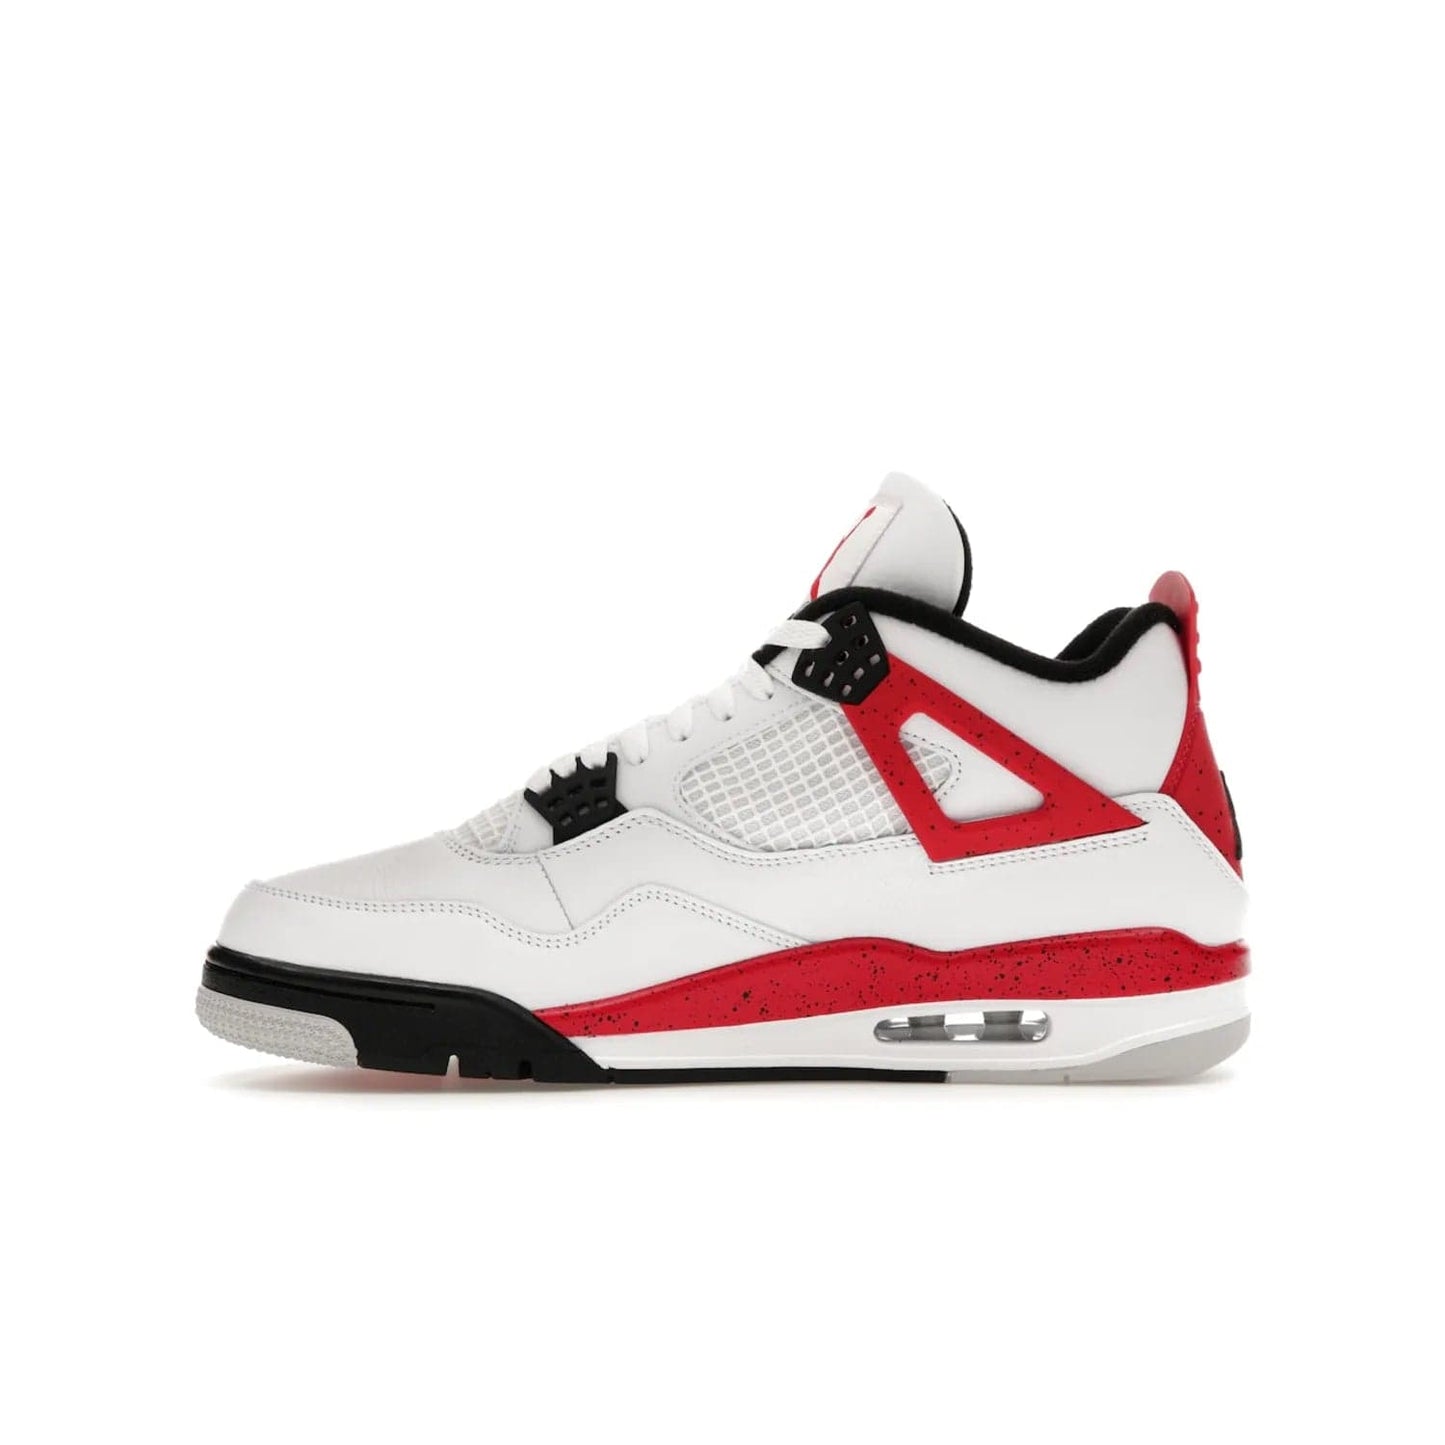 Jordan 4 Retro Red Cement - Image 19 - Only at www.BallersClubKickz.com - Iconic Jordan silhouette with a unique twist. White premium leather uppers with fire red and black detailing. Black, white, and fire red midsole with mesh detailing and Jumpman logo. Jordan 4 Retro Red Cement released with premium price.